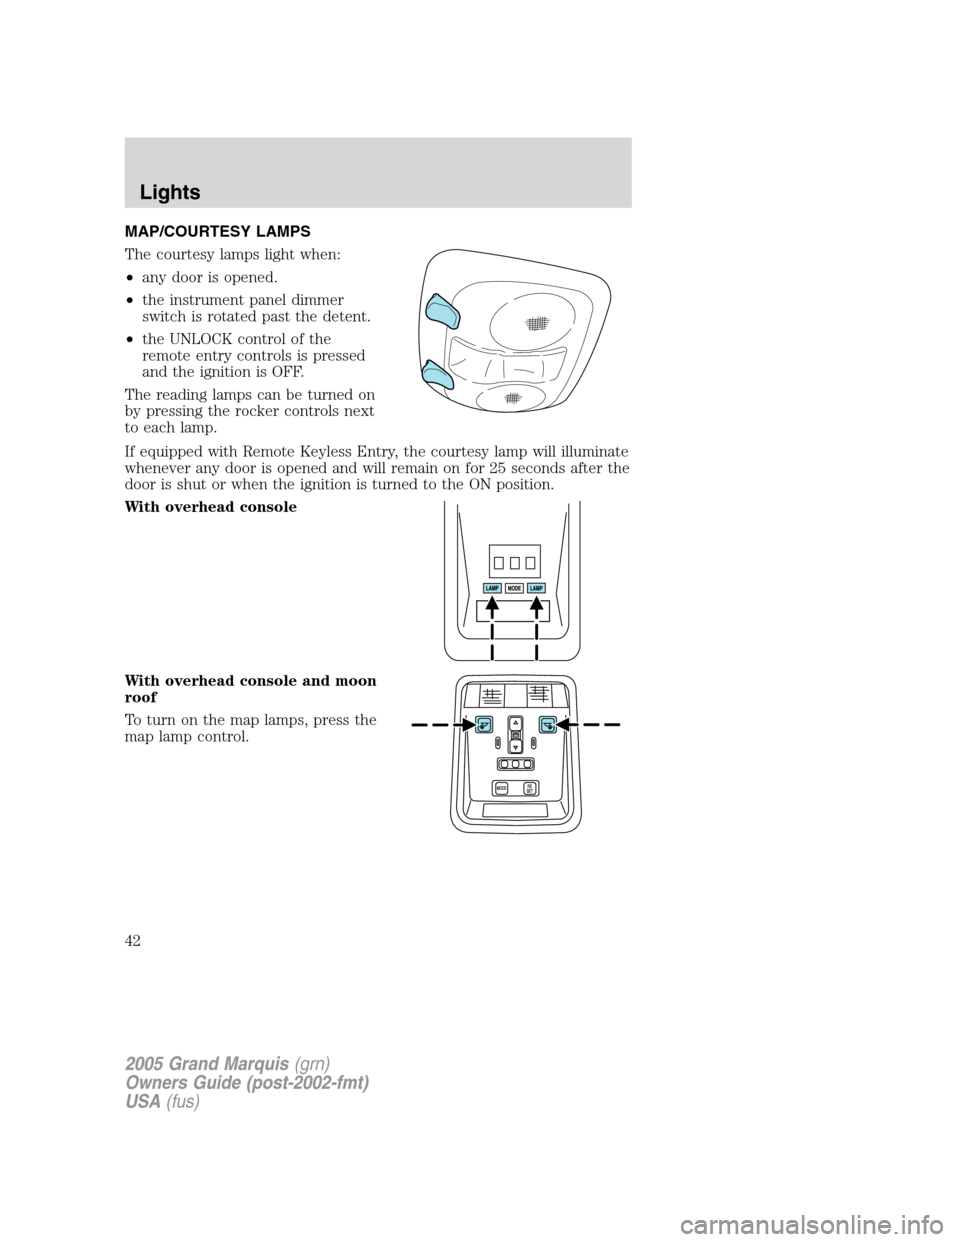 Mercury Grand Marquis 2005  Owners Manuals MAP/COURTESY LAMPS
The courtesy lamps light when:
•any door is opened.
•the instrument panel dimmer
switch is rotated past the detent.
•the UNLOCK control of the
remote entry controls is pressed